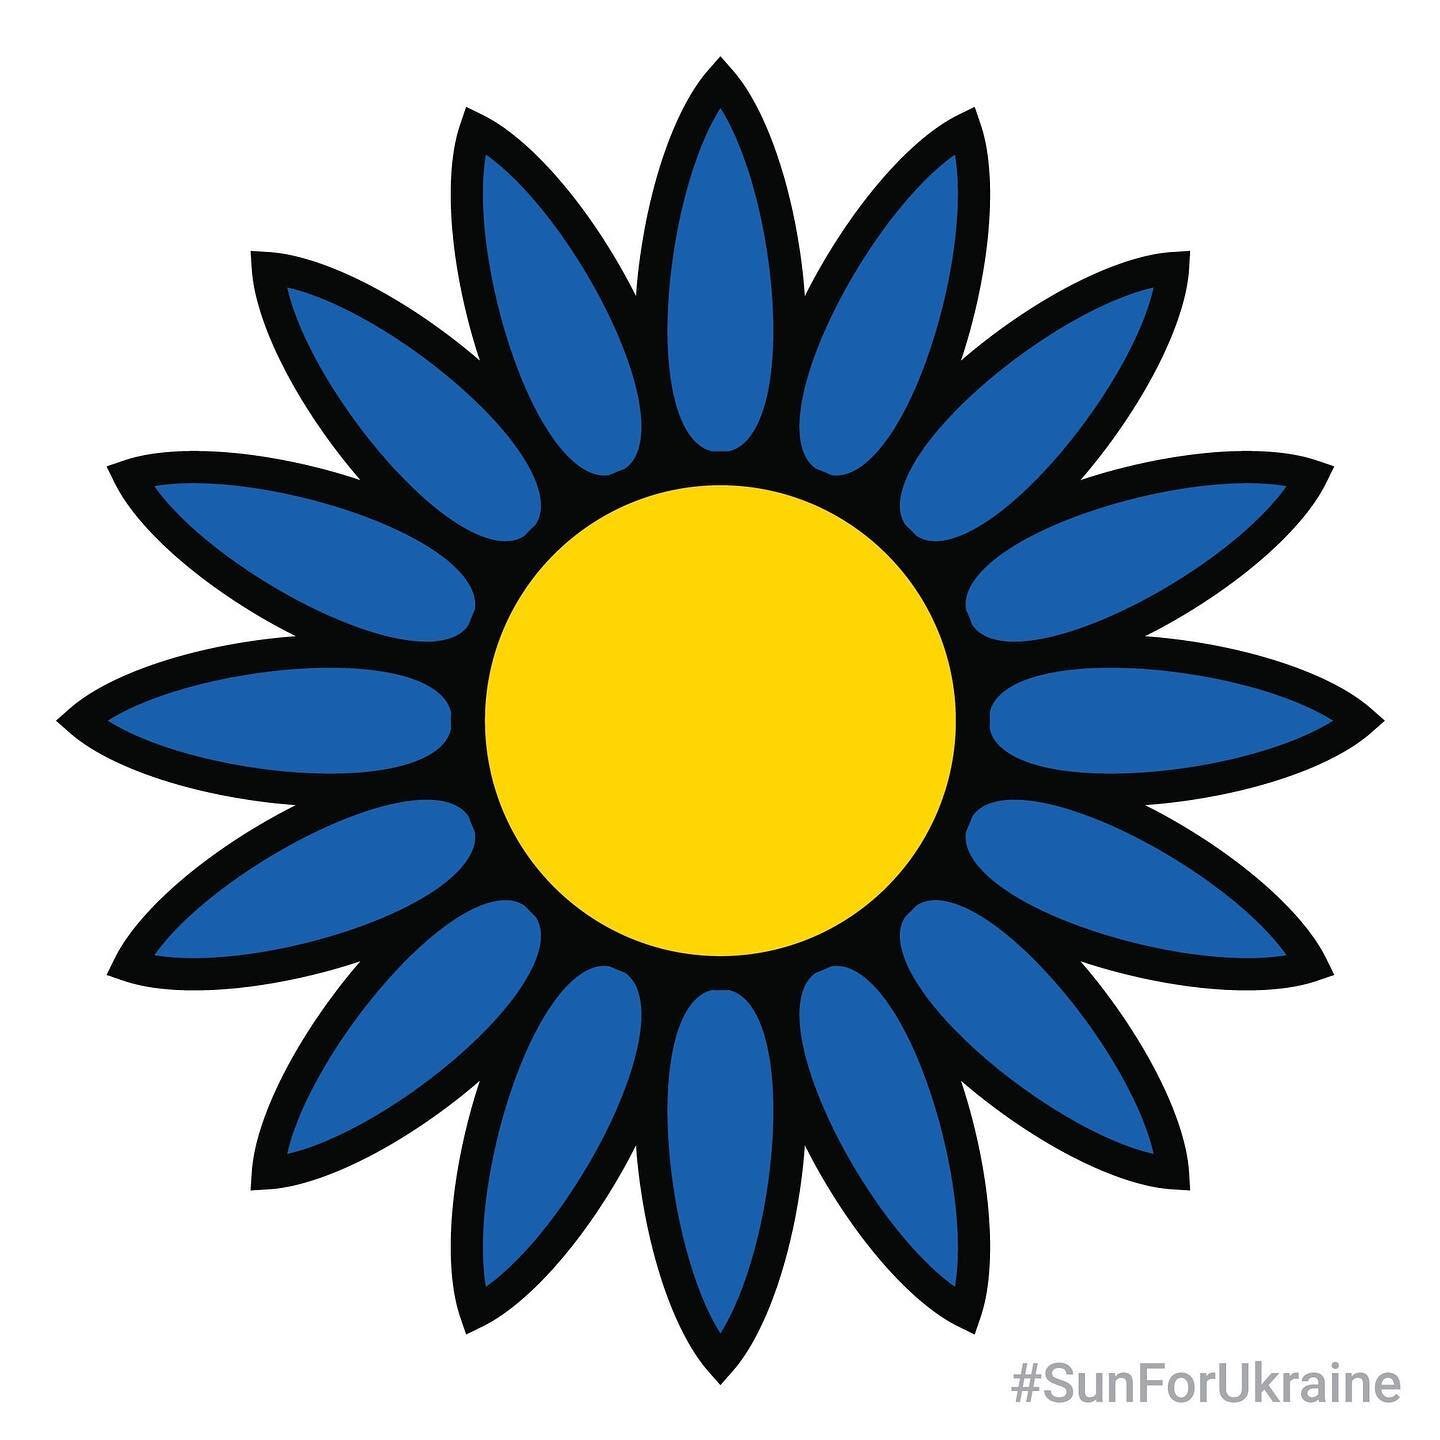 PRINT THIS AND PUT IT ON YOUR WINDOW!

Those who need help (and those helping them) are most probably not your friends on social media so how can they know you're willing to help them?

Print this sunflower, put it on your window and hopefully it wil